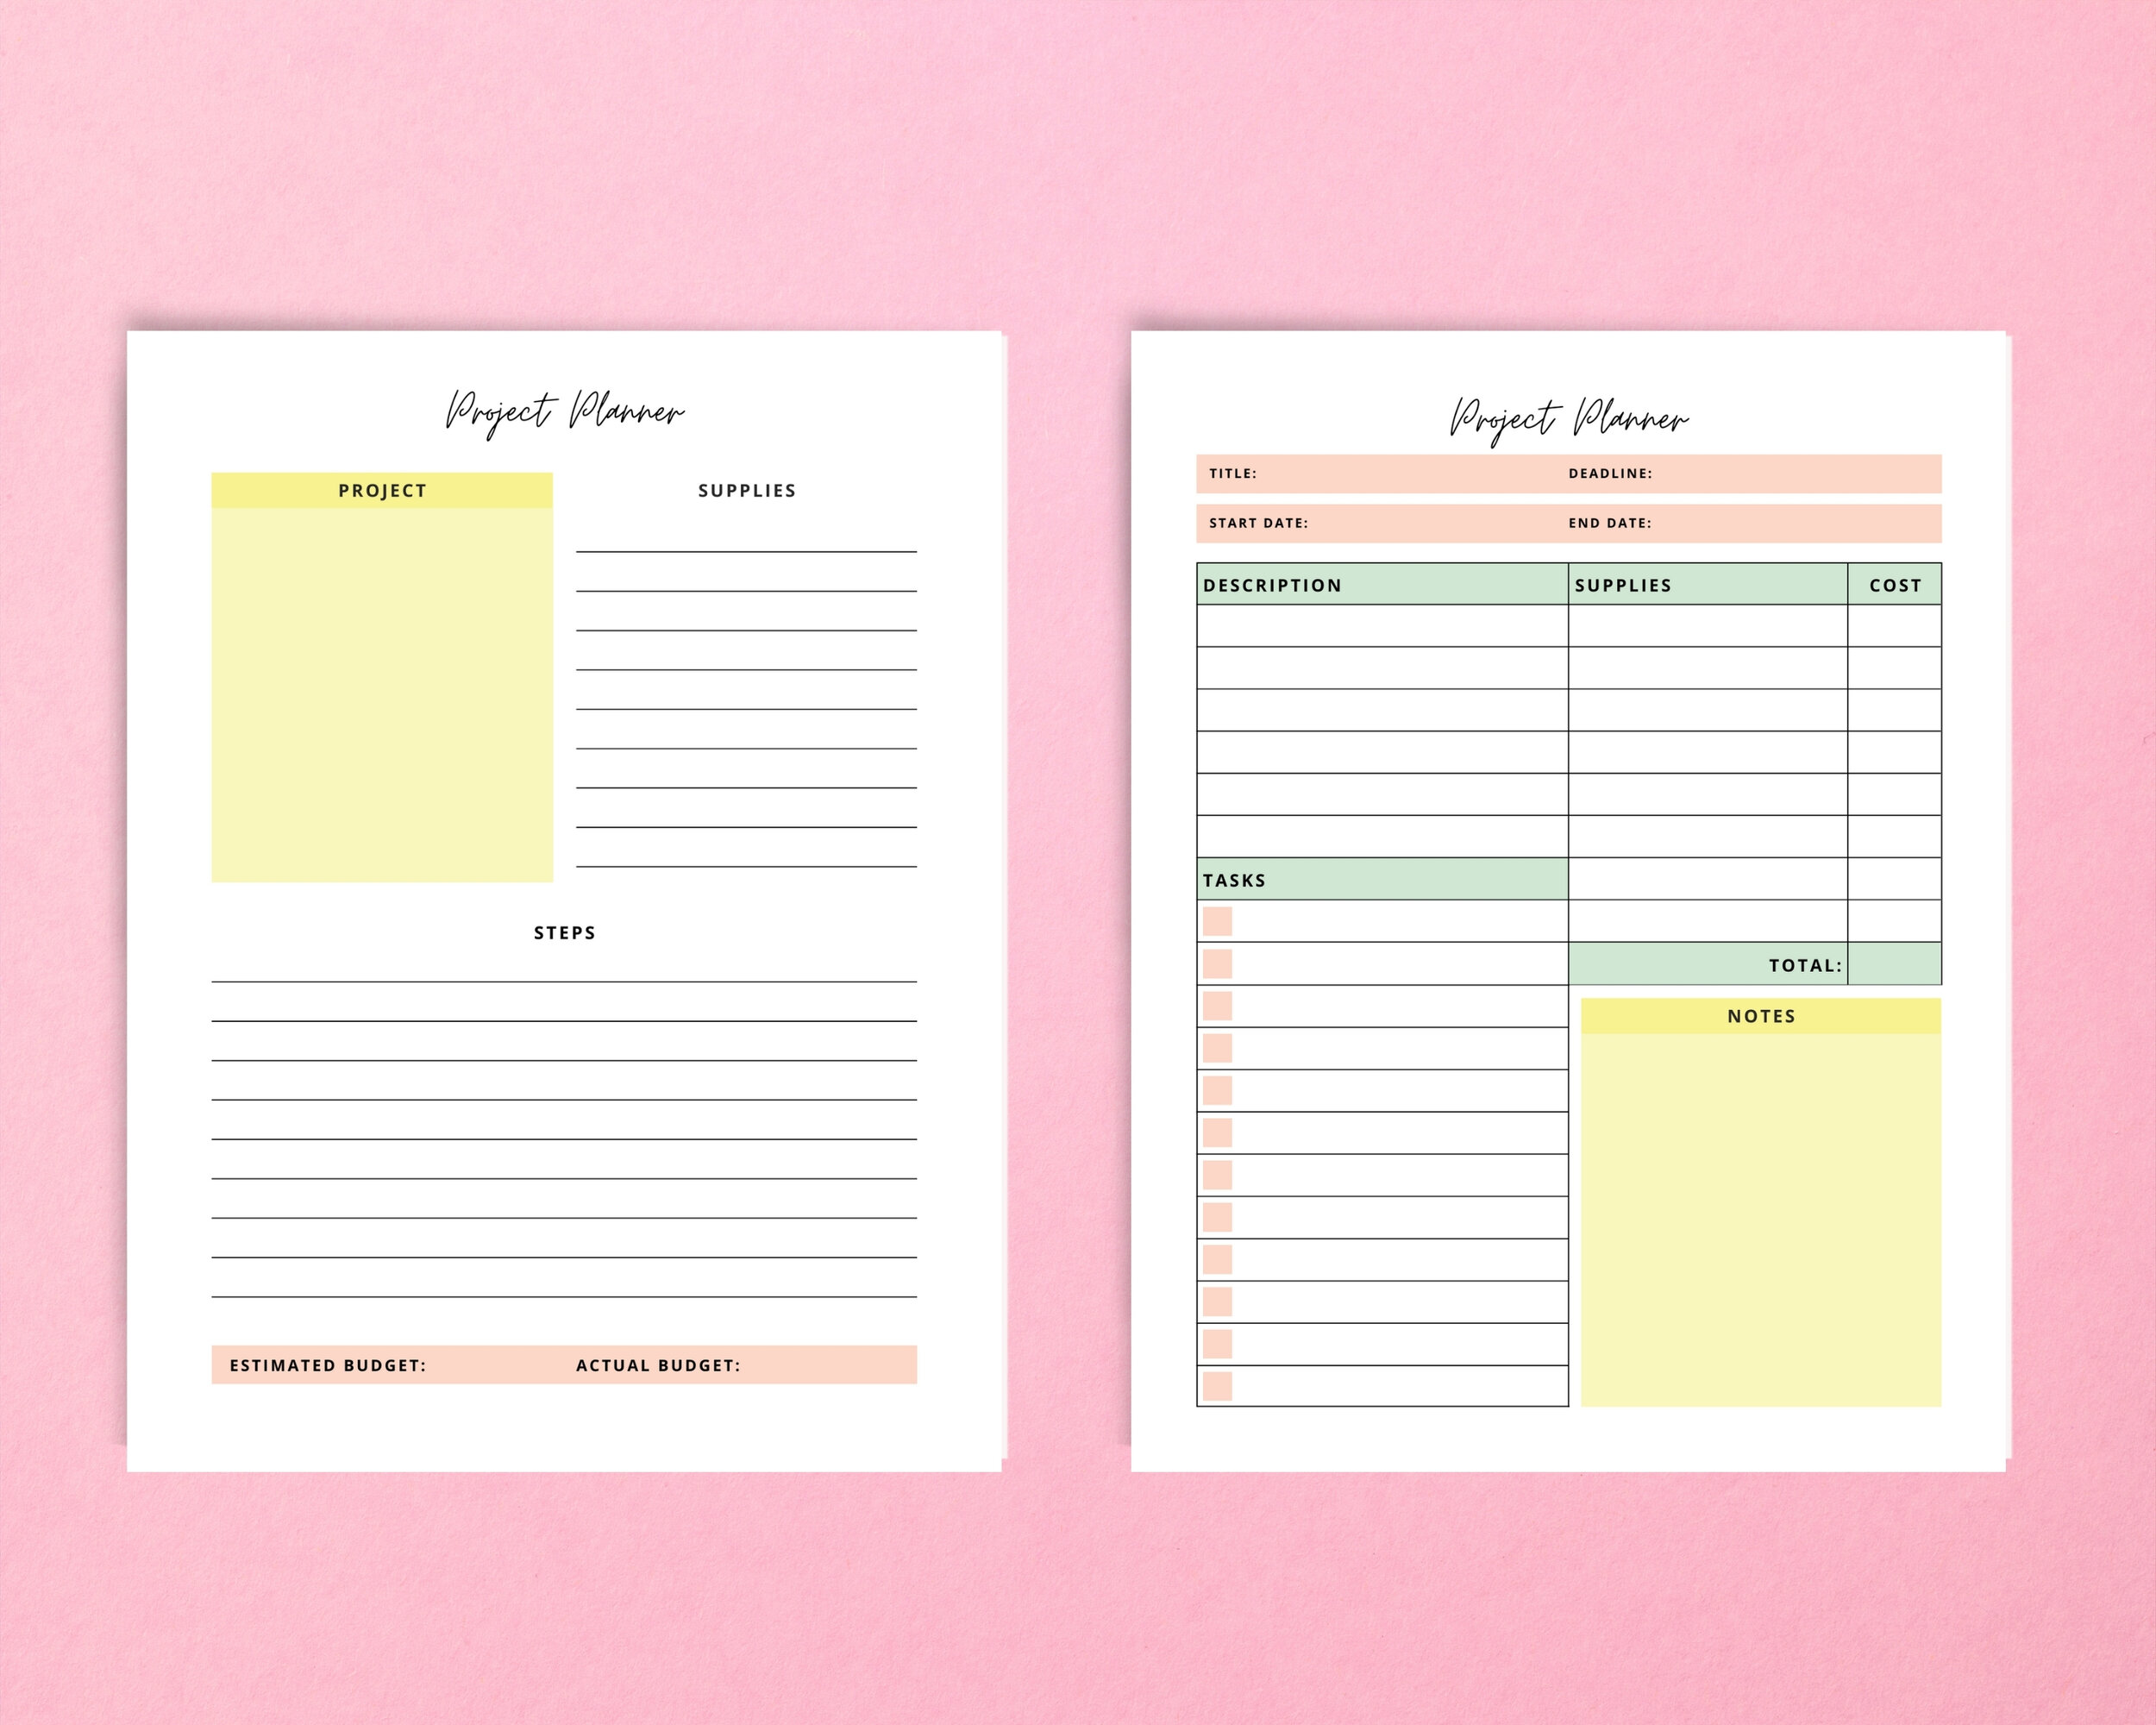 project planner printable pdf page.jpg